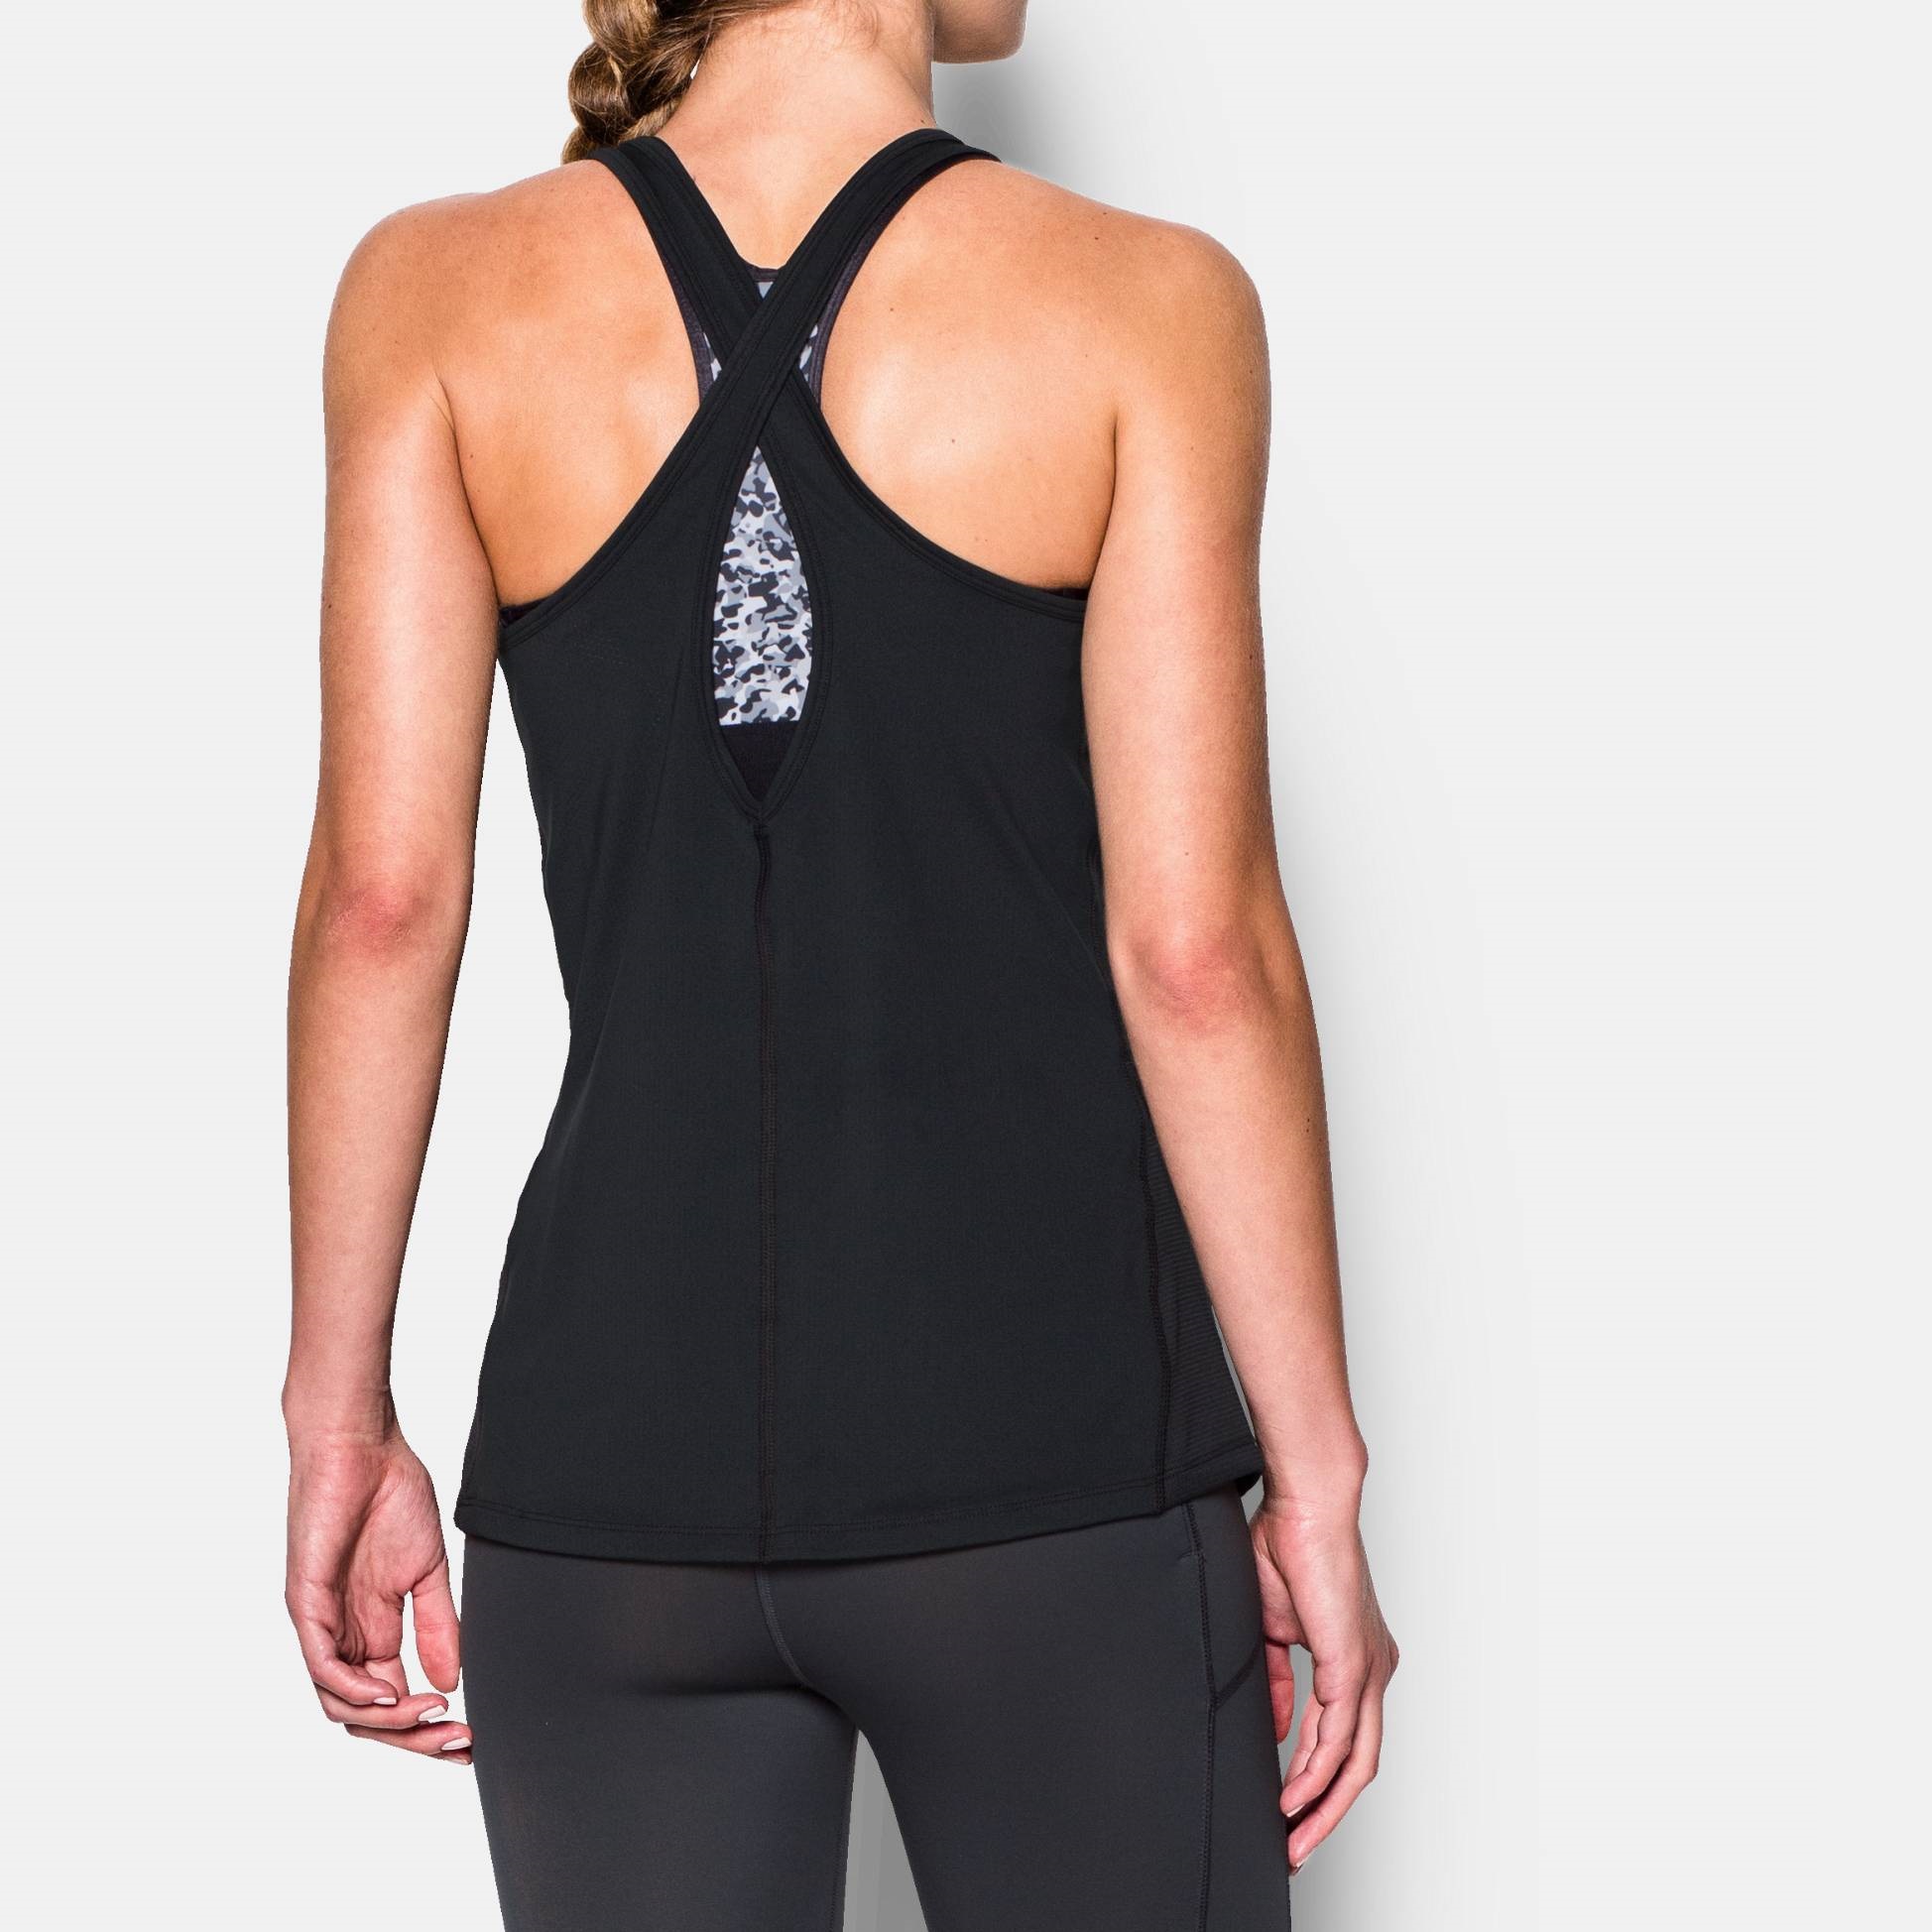  -  under armour CoolSwitch Tank